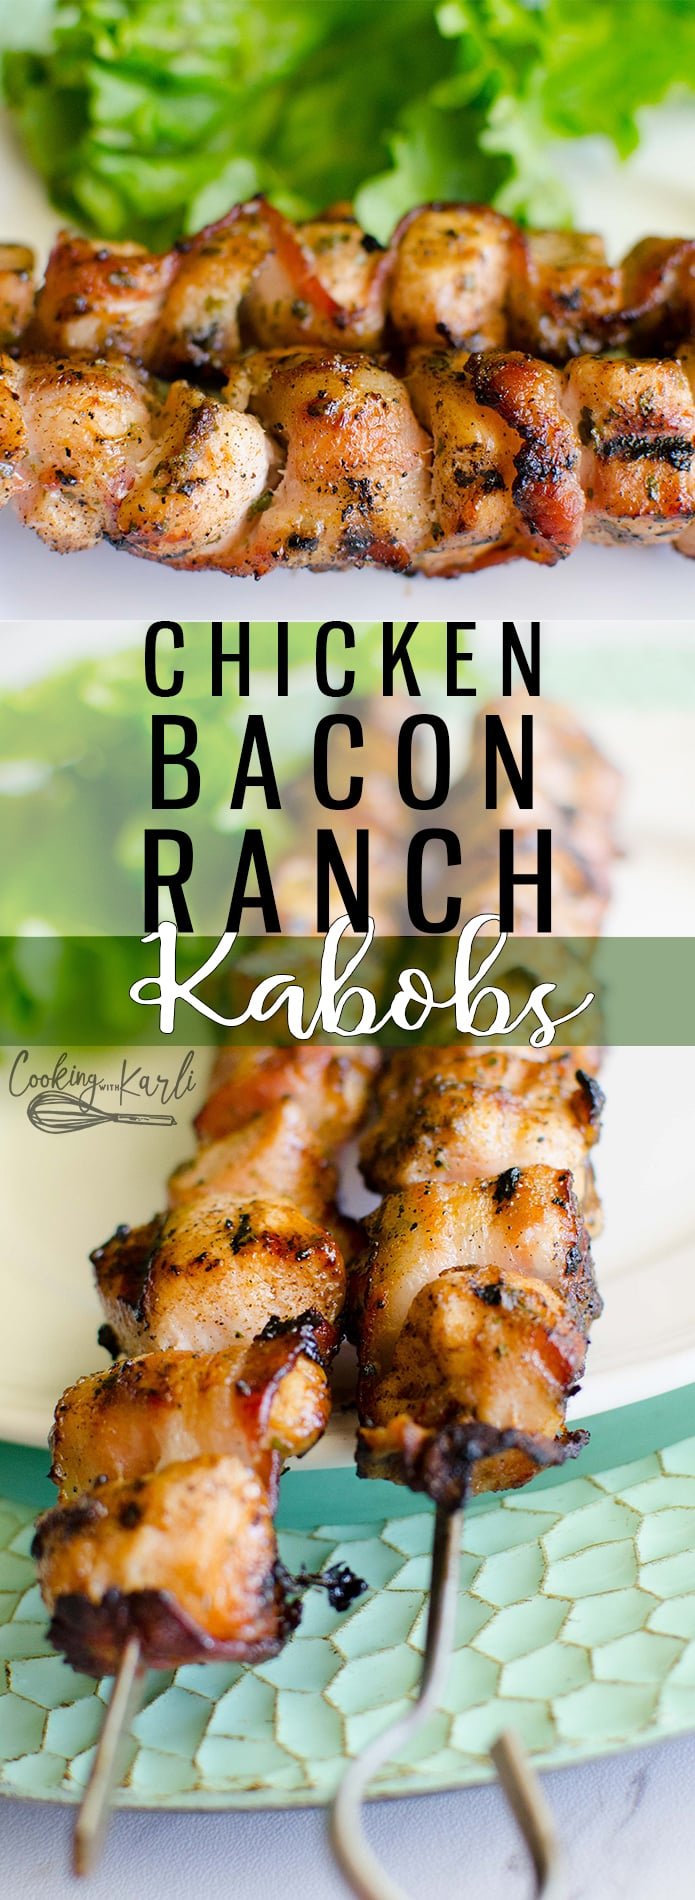 Chicken Bacon Ranch Kabobs are made on the grill and are bursting with the classic ranch flavor. Chicken chunks are rubbed with dry ranch dressing packet and then skewered with bacon. The kabobs are grilled to crispy perfection. |Cooking with Karli| #grill #memorialday #summer #chicken #bacon #ranch #recipe #dryrub